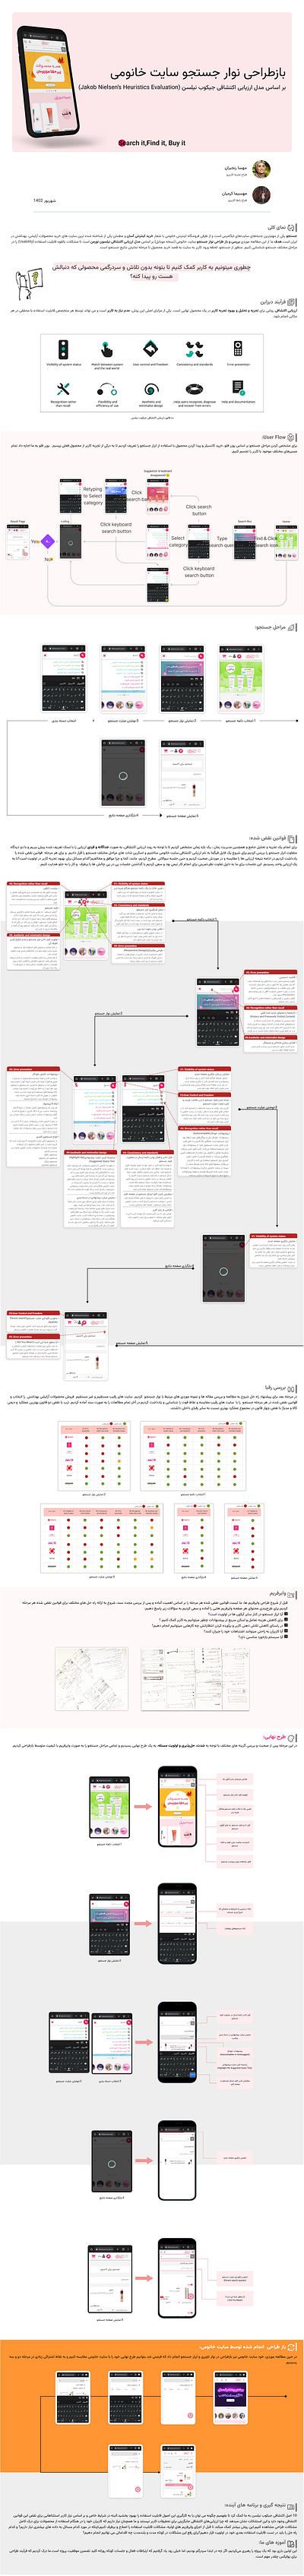 UX Case Study, Improving the Search Experience of Khanumi app heuristic evaluation redesign ui ux